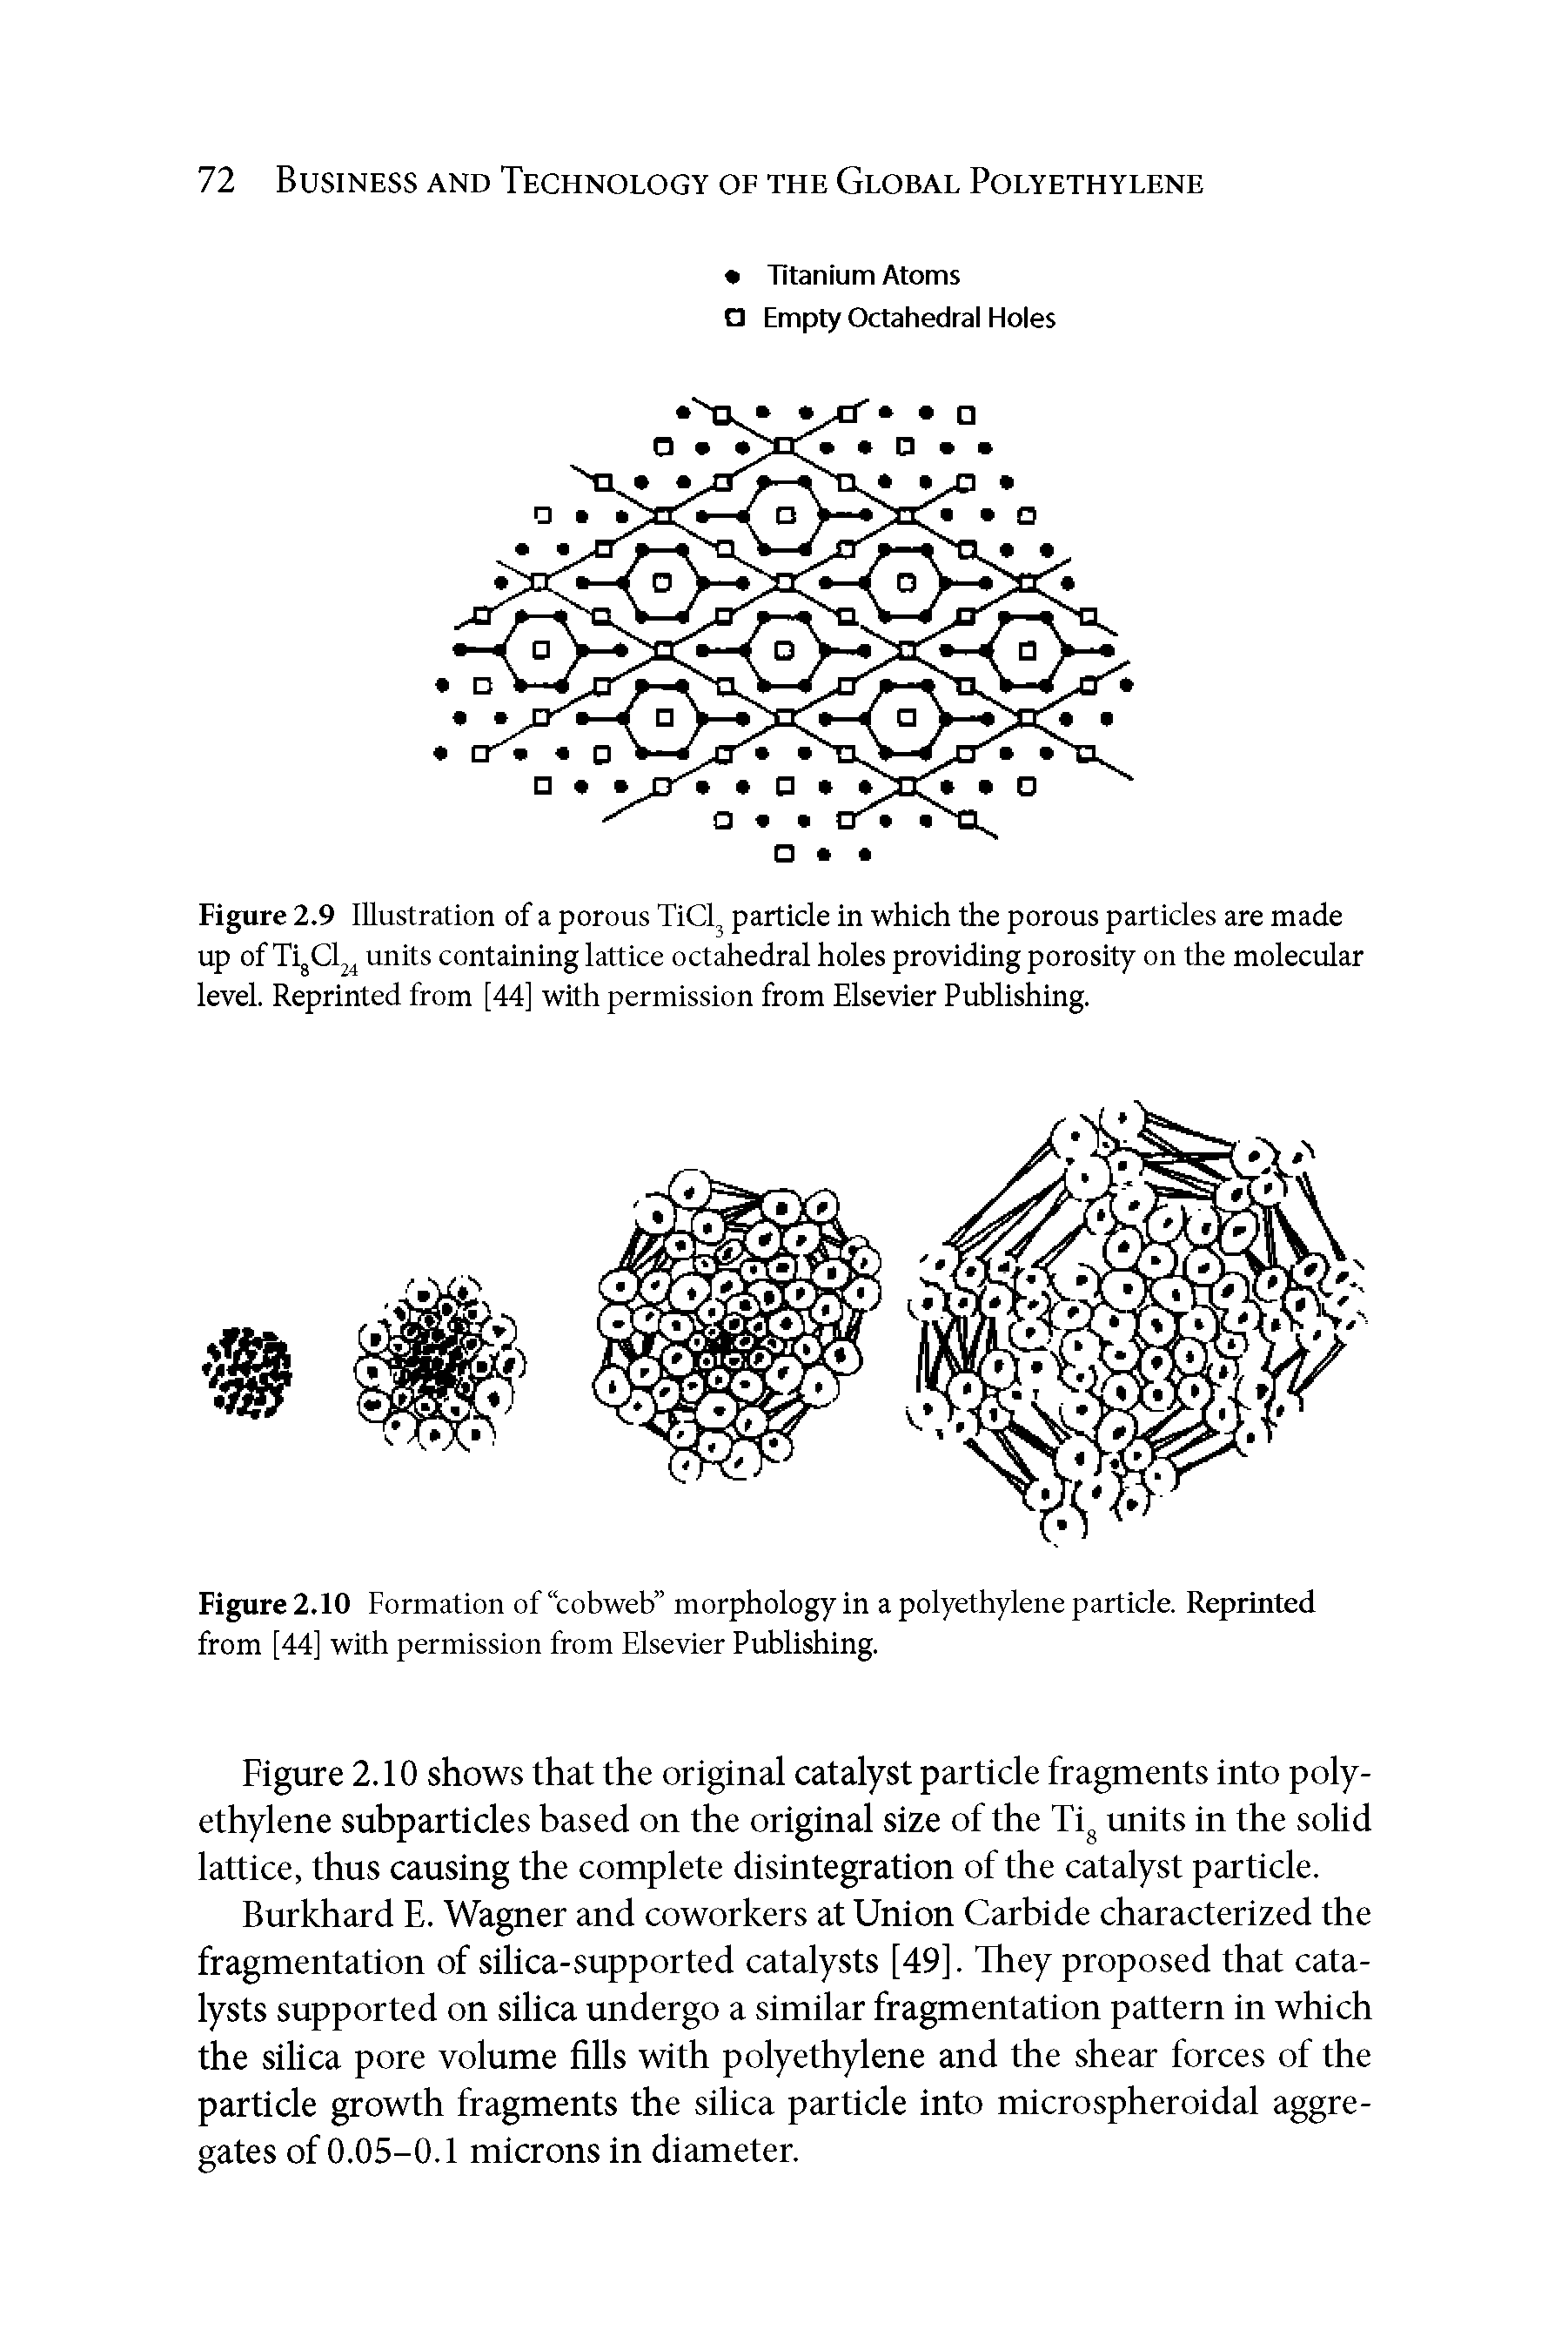 Figure 2.9 Illustration of a porous TiCl particle in which the porous particles are made up of TijCl units containing lattice octahedral holes providing porosity on the molecular level. Reprinted from [44] with permission from Elsevier Publishing.